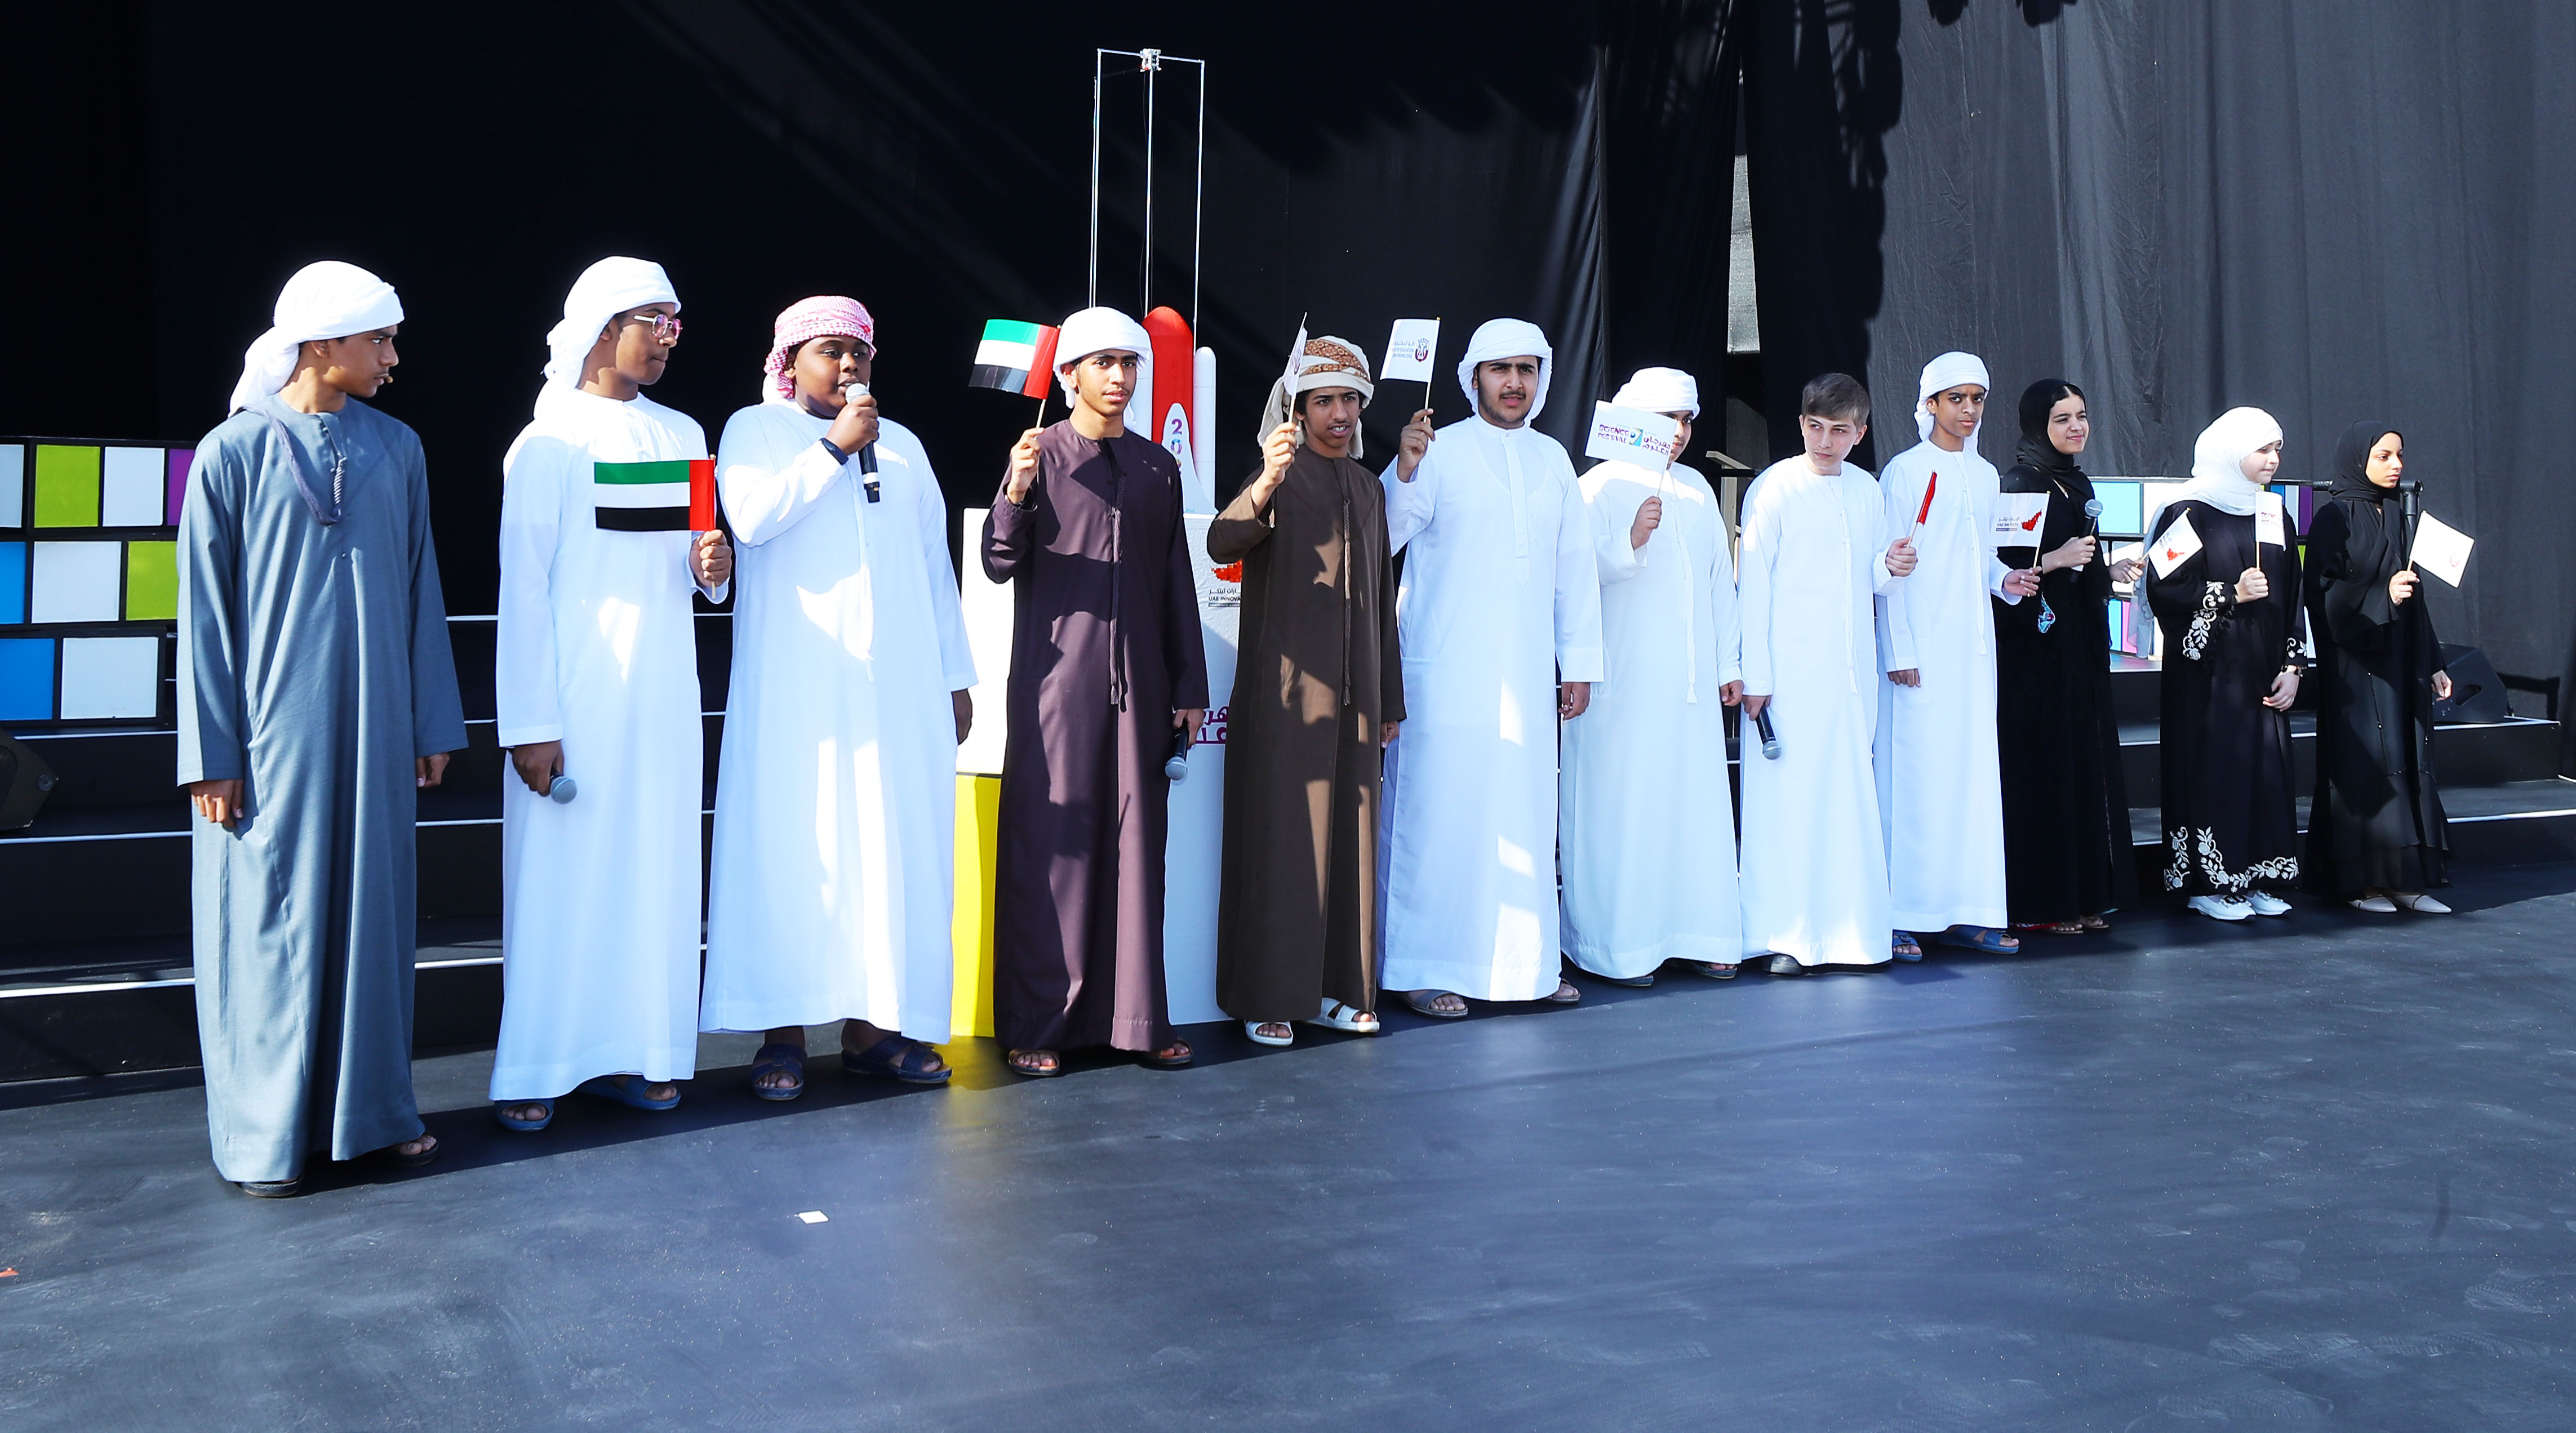 The 10th Edition Of Abu Dhabi Science Festival Kicks Off The UAE Innovation Month From The Capital Of UAE